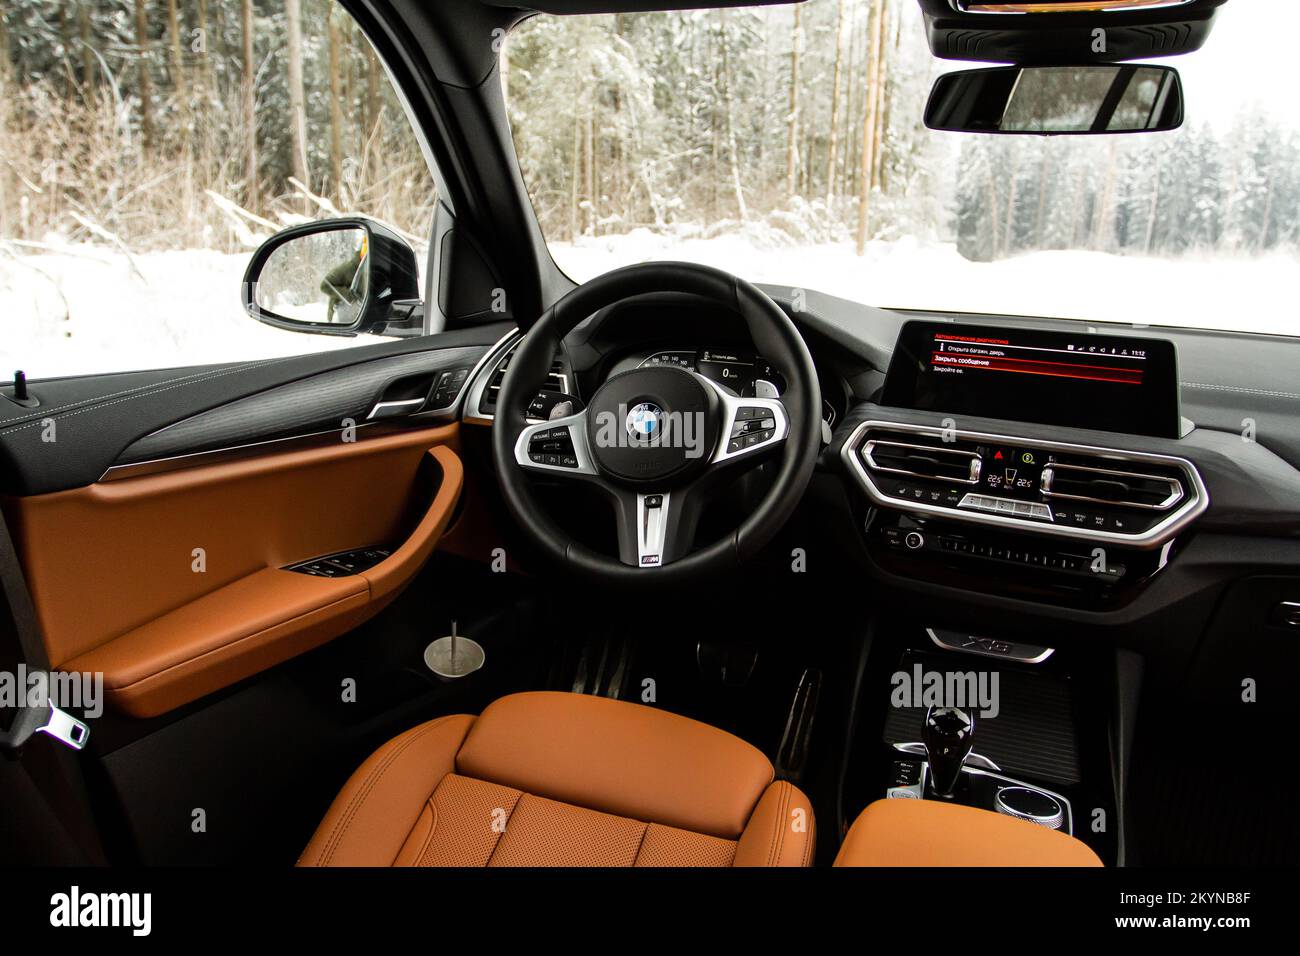 MOSCOW, RUSSIA - FEBRUARY 05, 2022. BMW X3 (G01), interior view. Compact luxury crossover SUV. BMW logo on the car steering wheel. Stock Photo